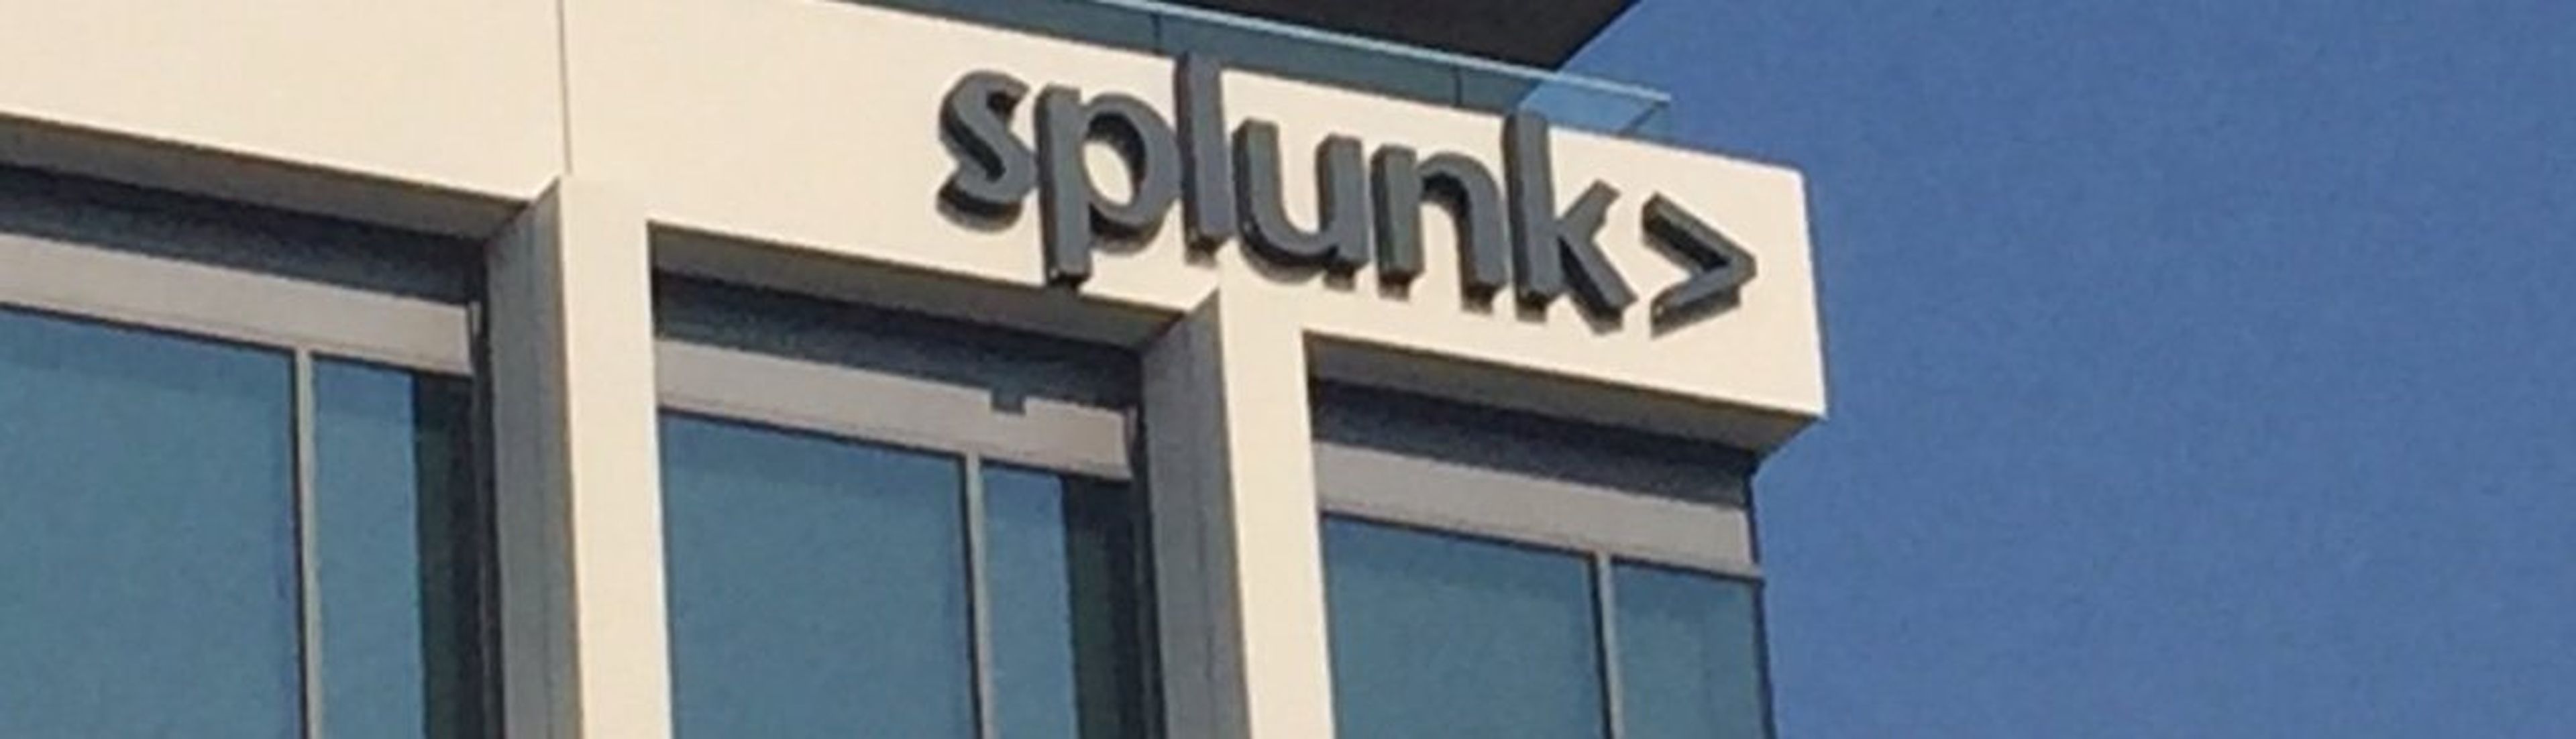 Splunk has fashioned a deal that would enable the fast-growing tech
company to greatly widen its presence at San Jose&#8217;s iconic and bustling
Santana Row mixed-use complex, according to several sources familiar with
the rental transaction.
George Avalos / Bay Area News Group